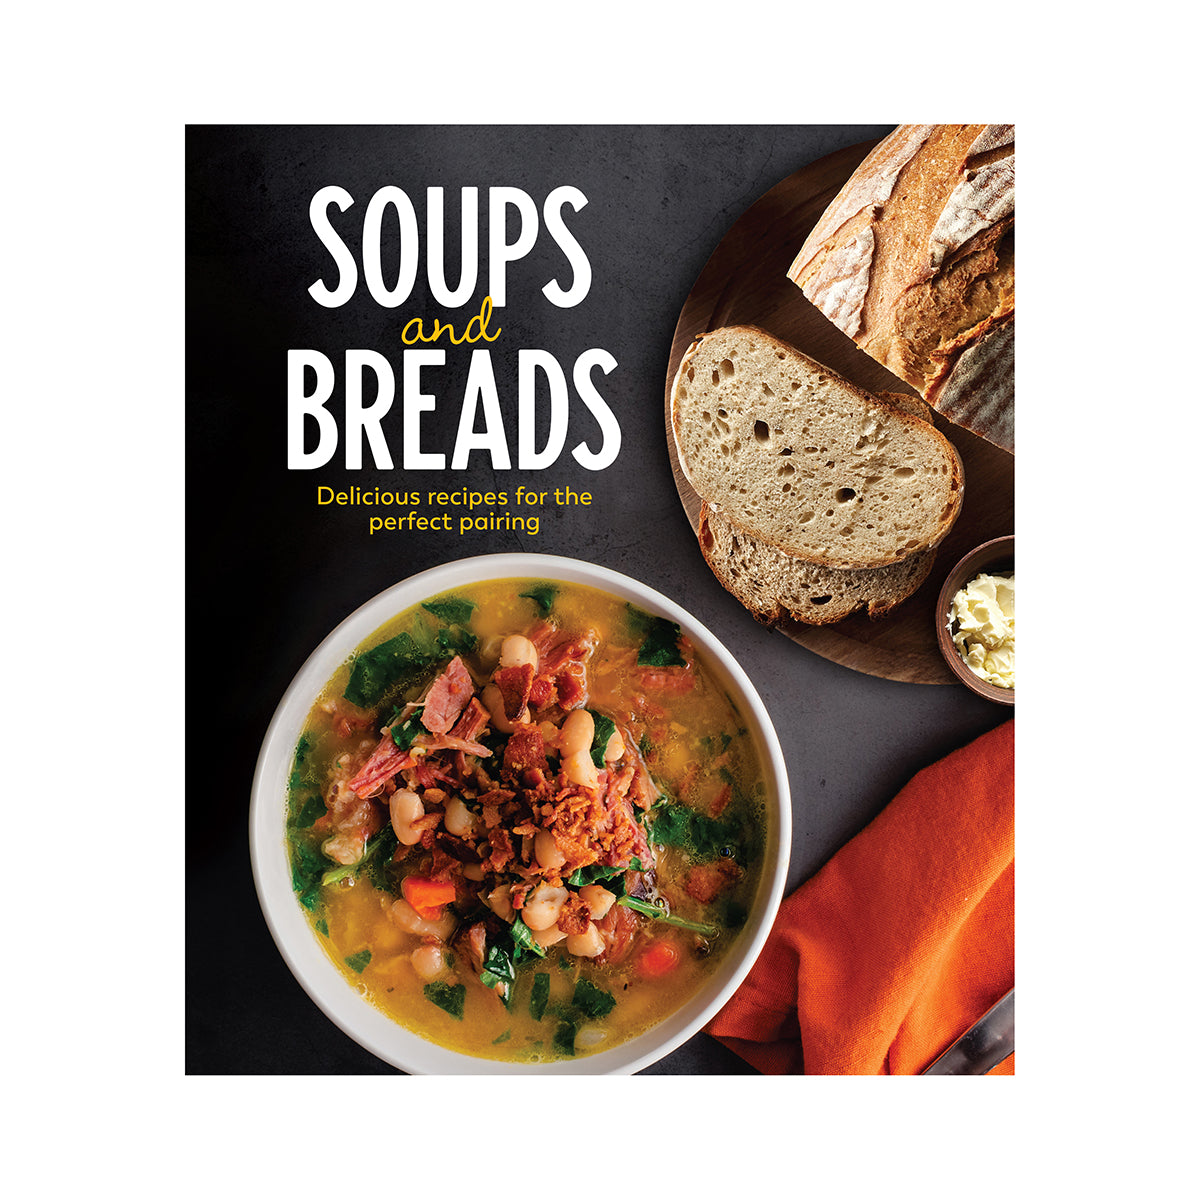 Soups and Breads